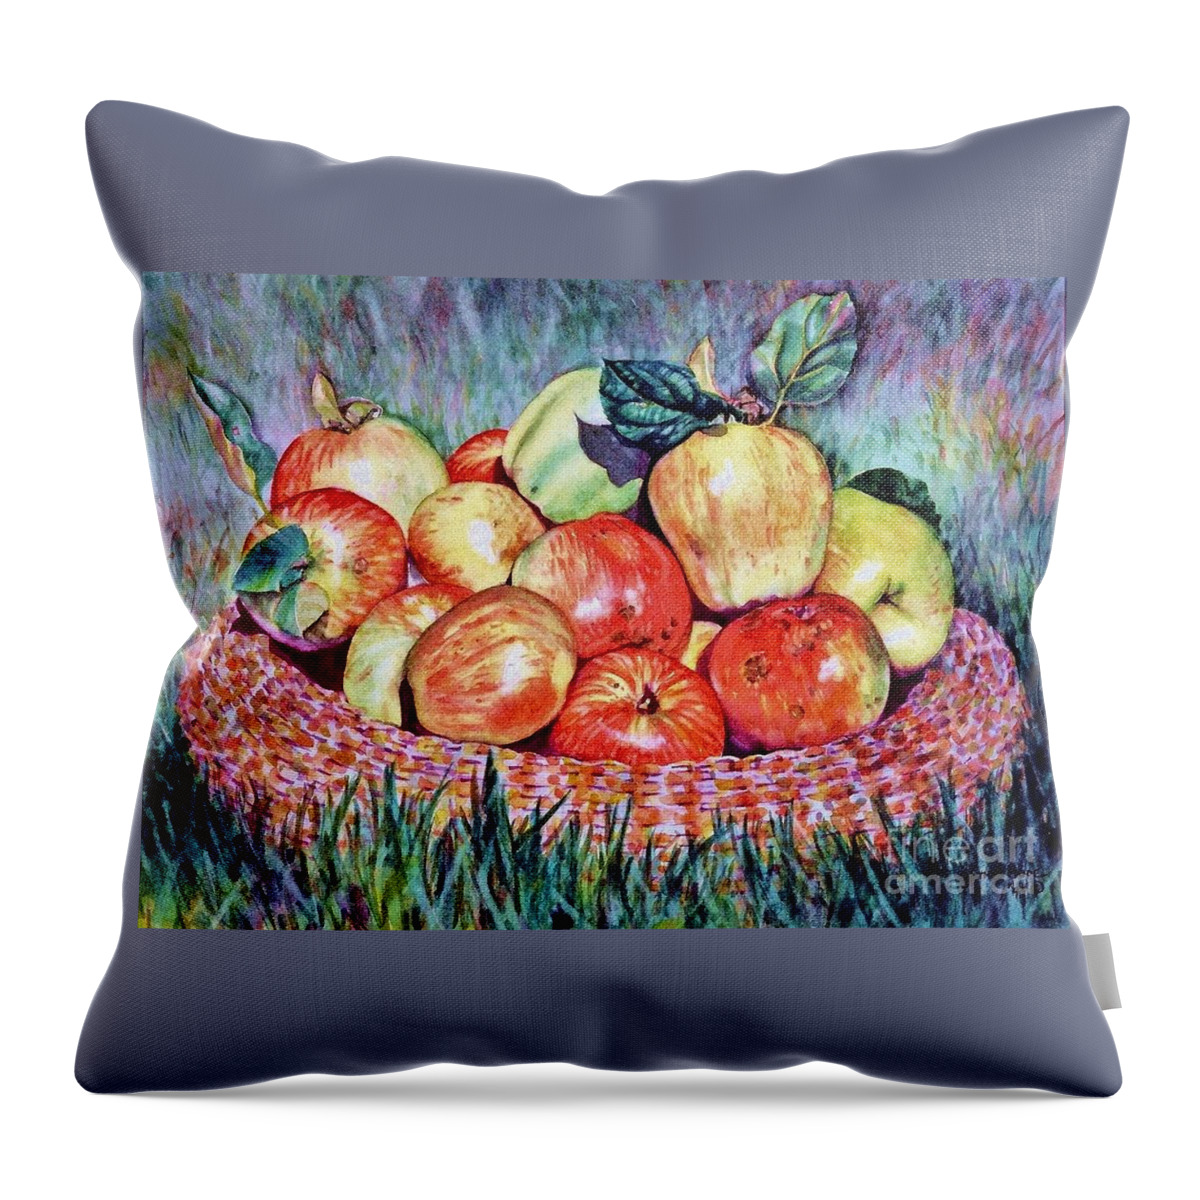 Cynthia Pride Watercolor Paintings Throw Pillow featuring the painting Backyard Apples by Cynthia Pride